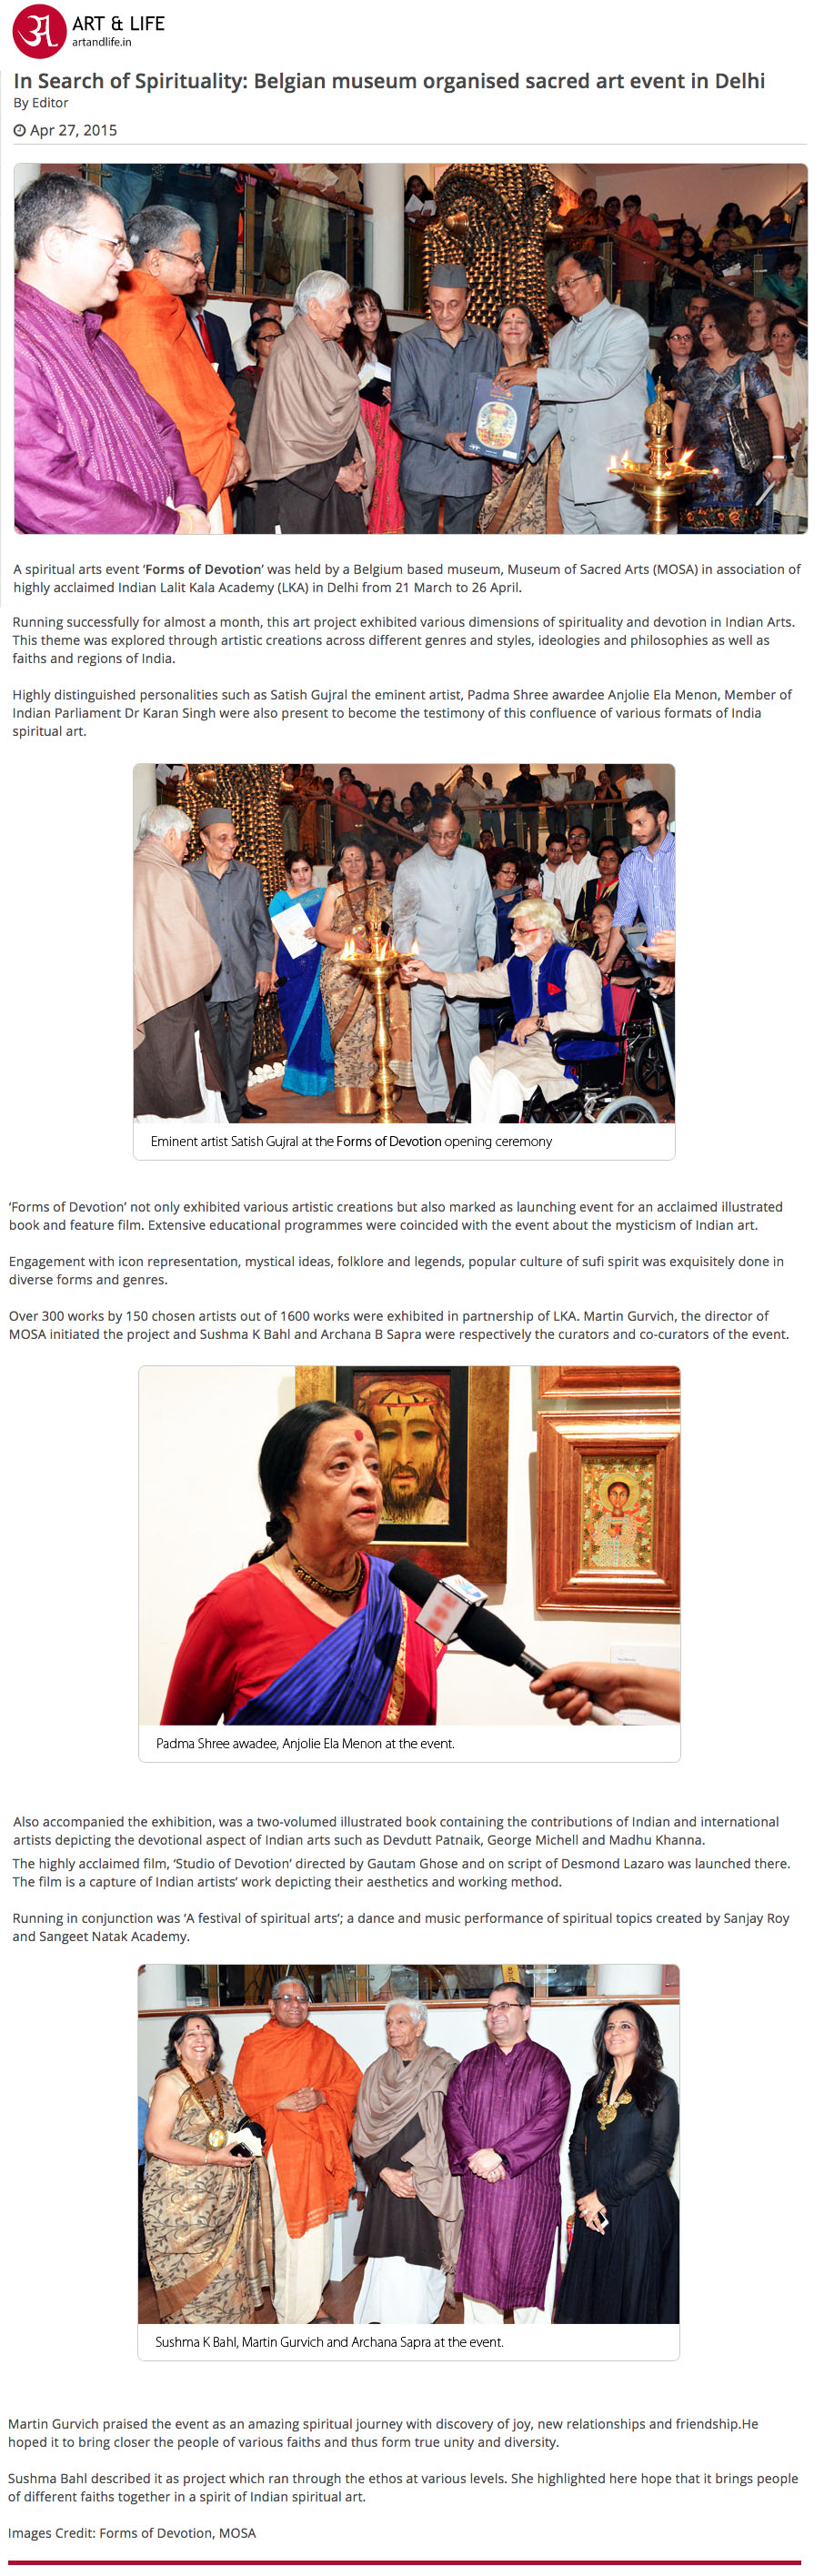 Art & Life (27th April 2015)- In Search of Spirituality - Belgium museum organized sacred art event in Delhi